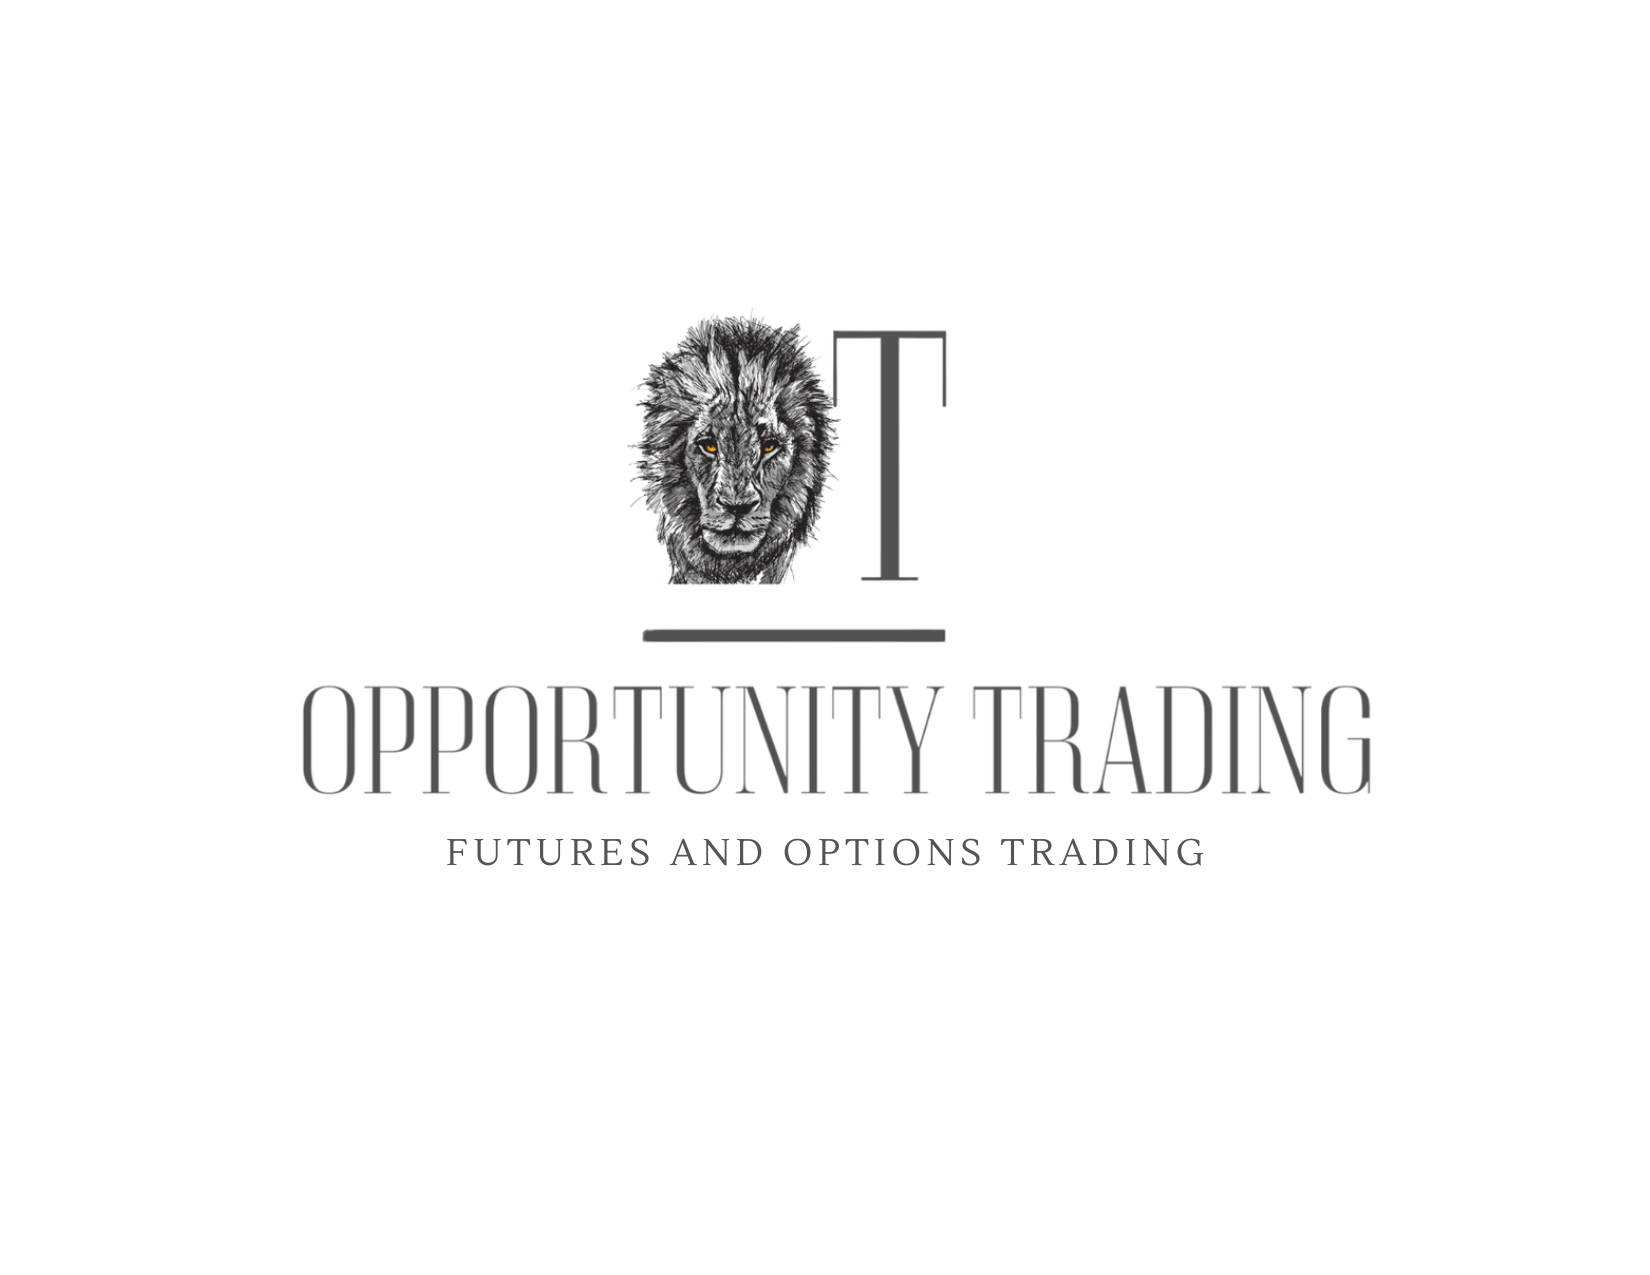 Options Trading Club - Options Trading Alerts Discord